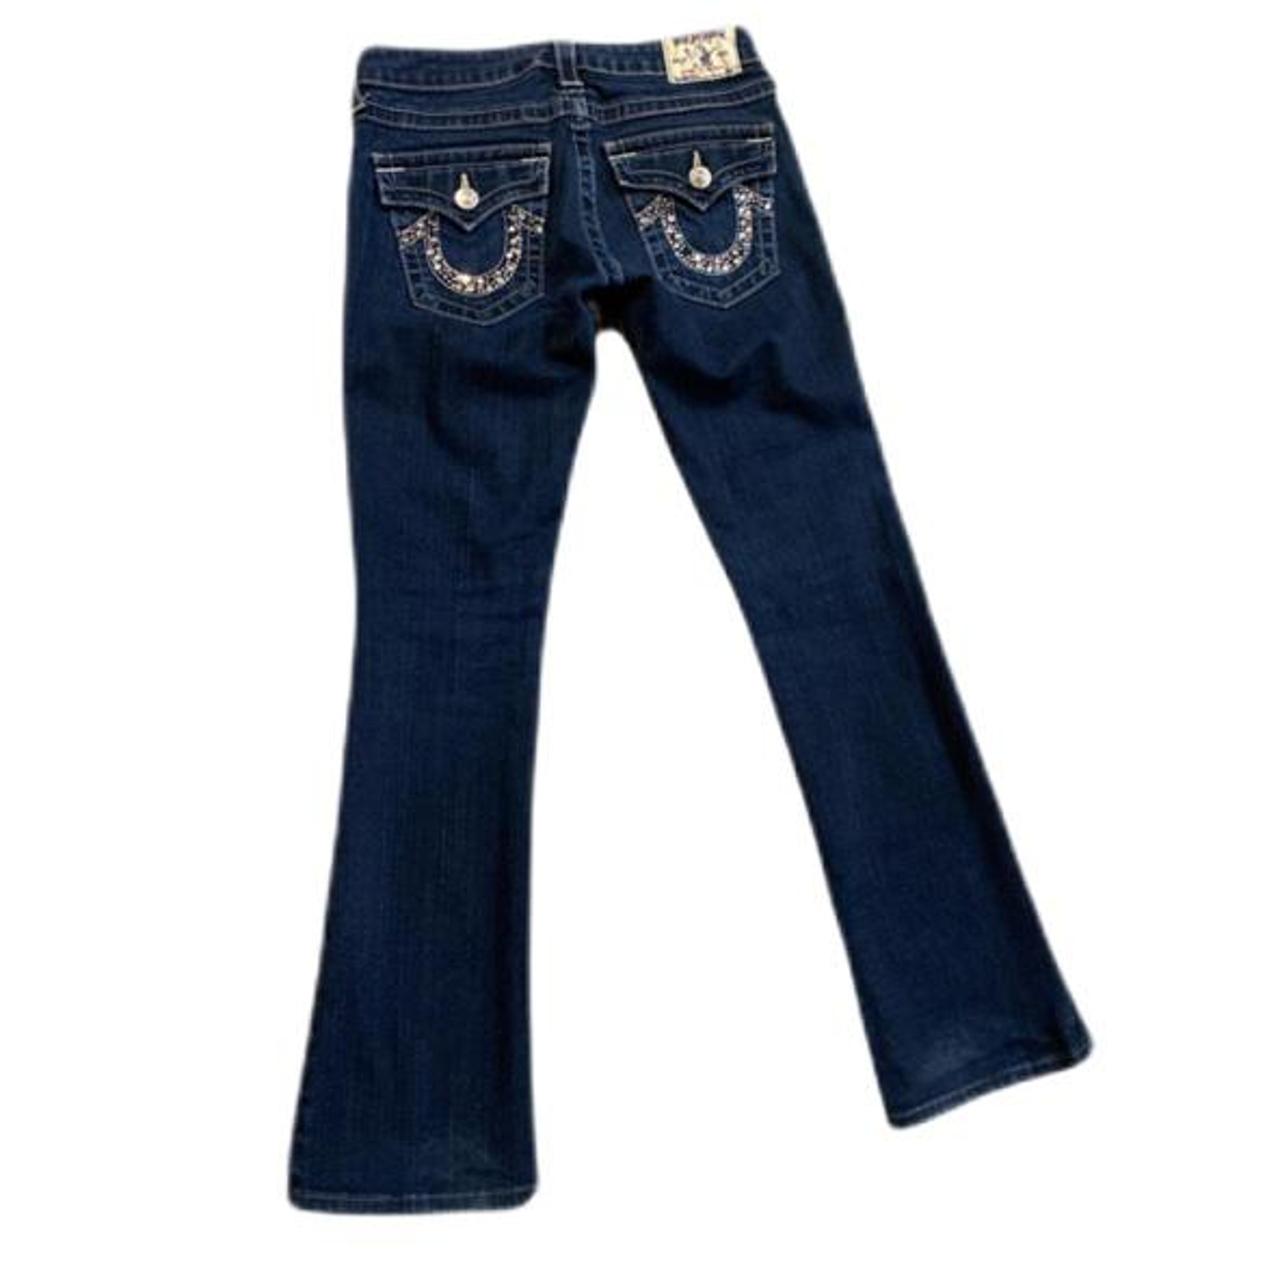 Product Image 1 - True religion. “Becky” low rise